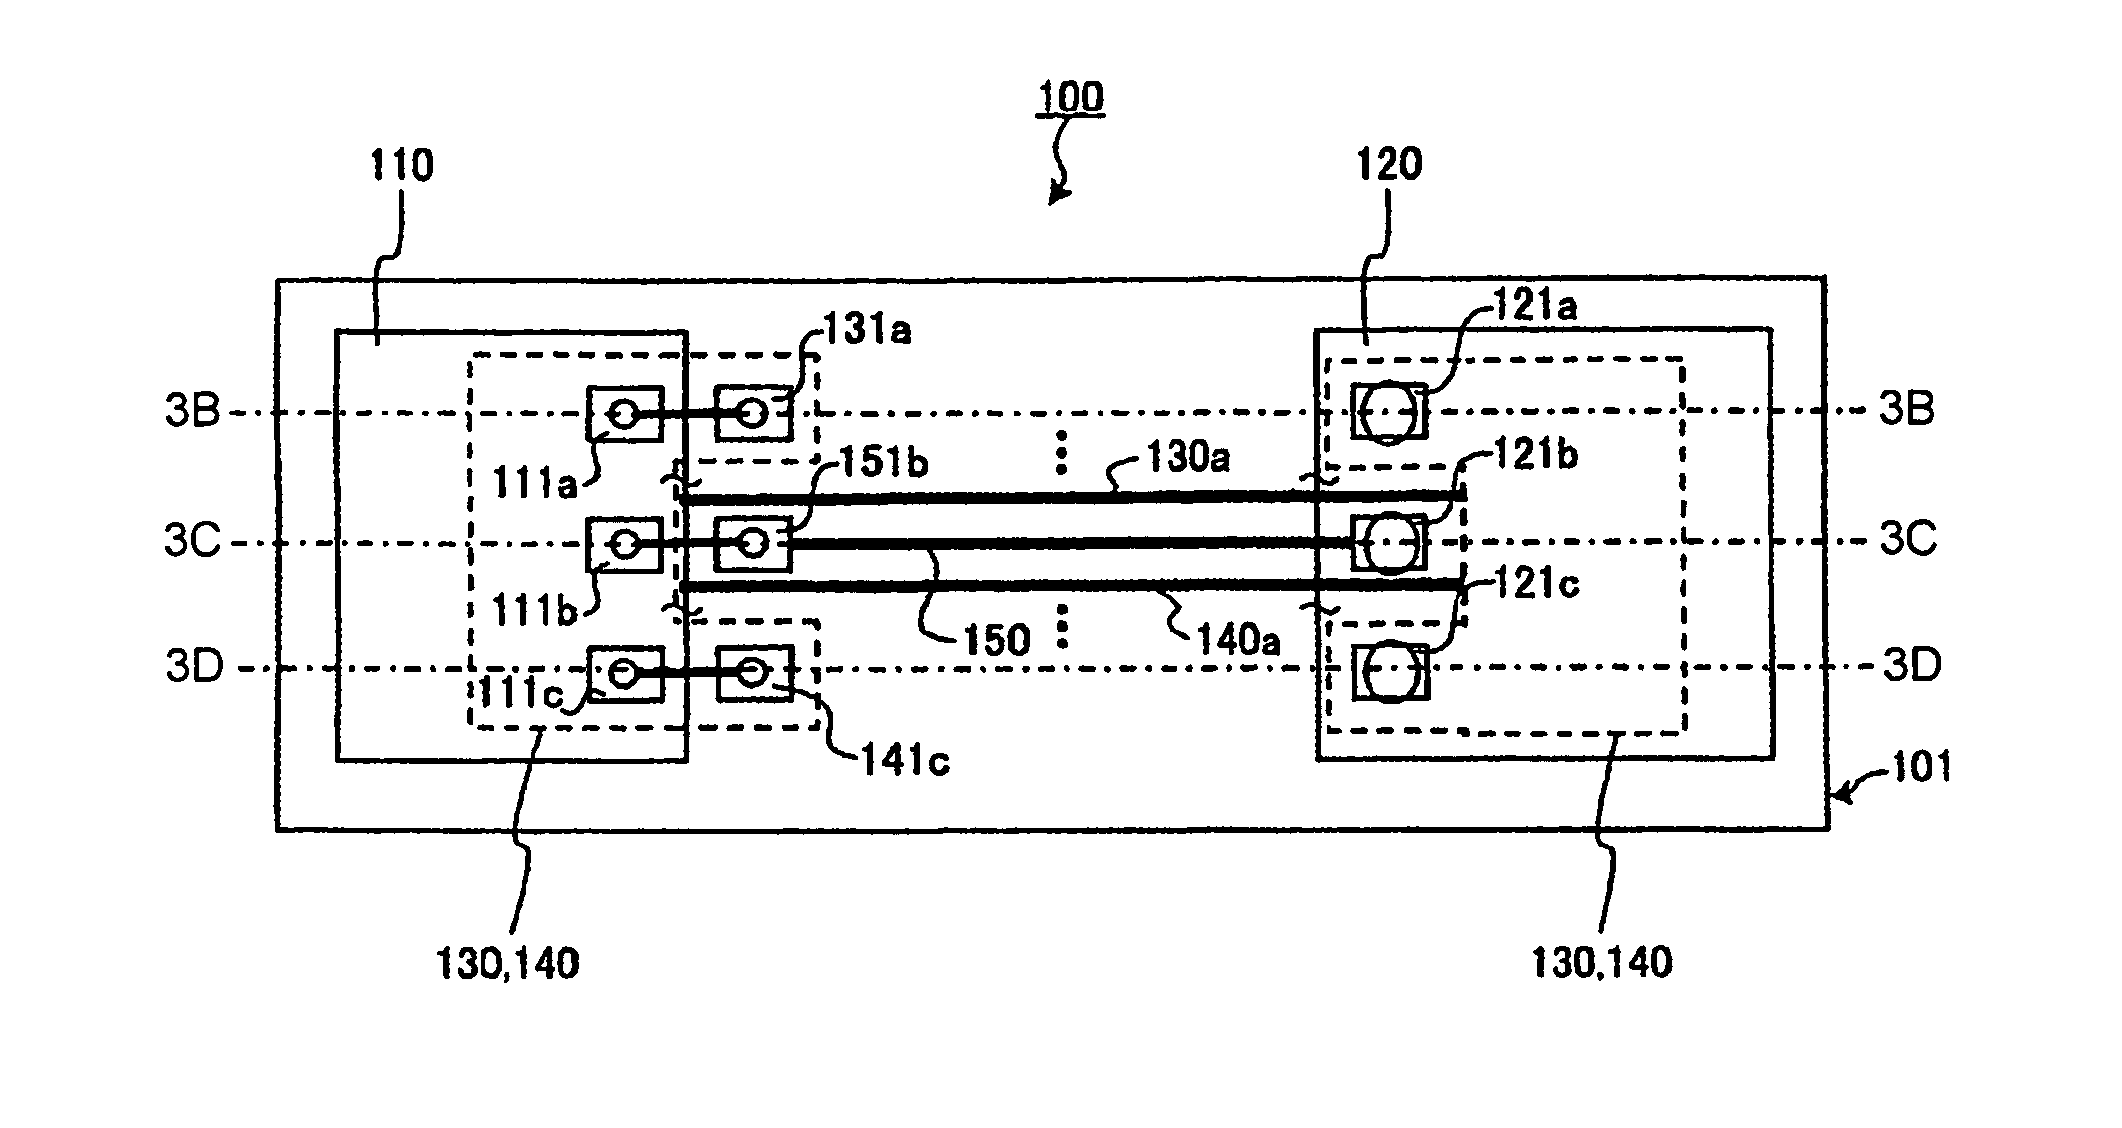 Wiring structure of a substrate